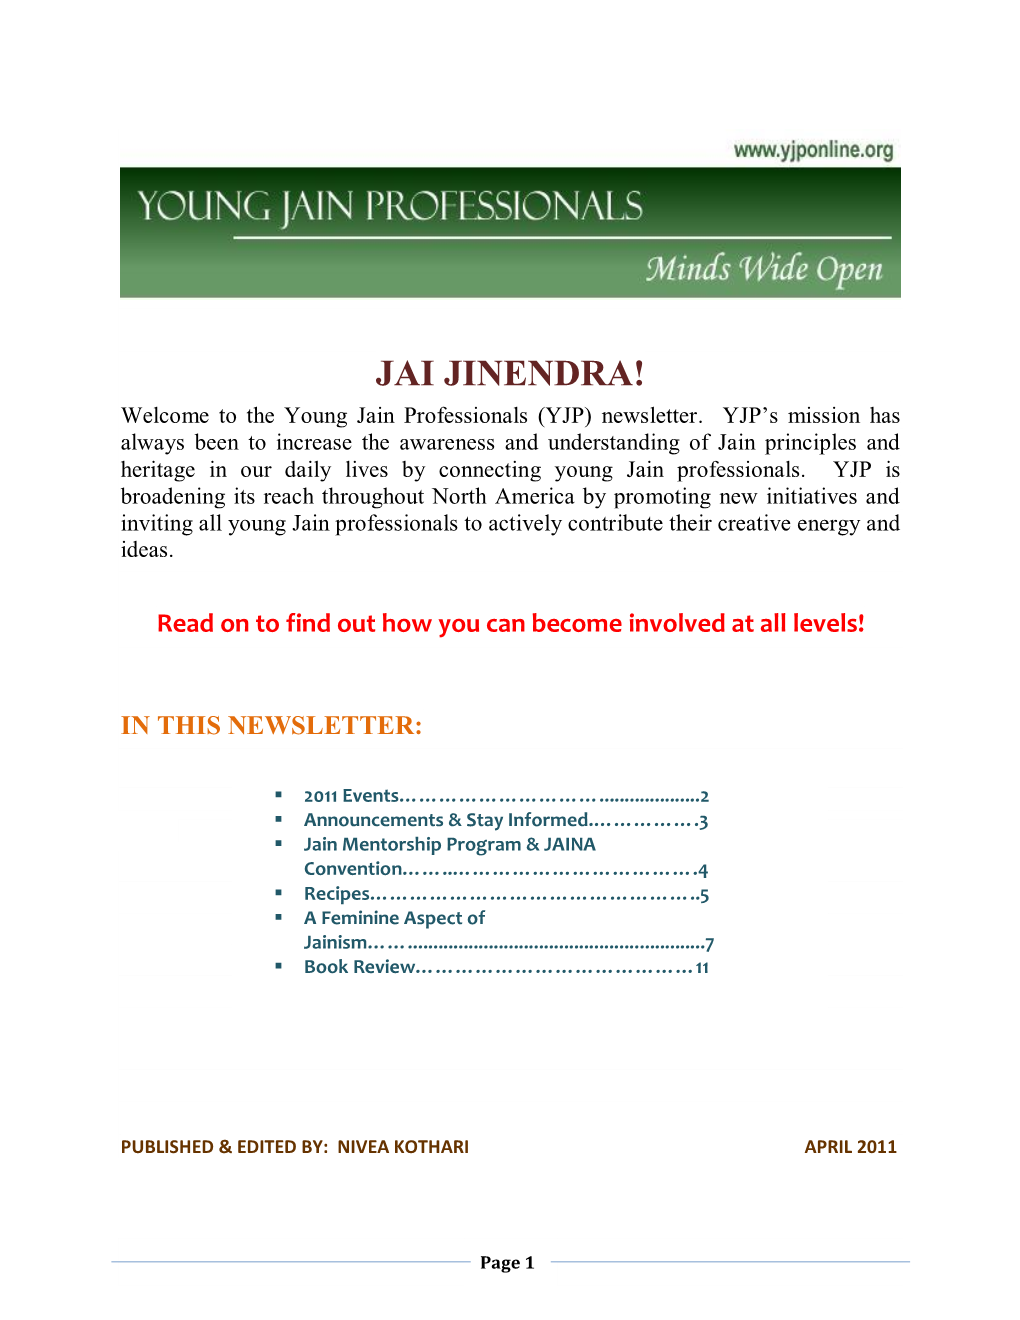 JAI JINENDRA! Welcome to the Young Jain Professionals (YJP) Newsletter